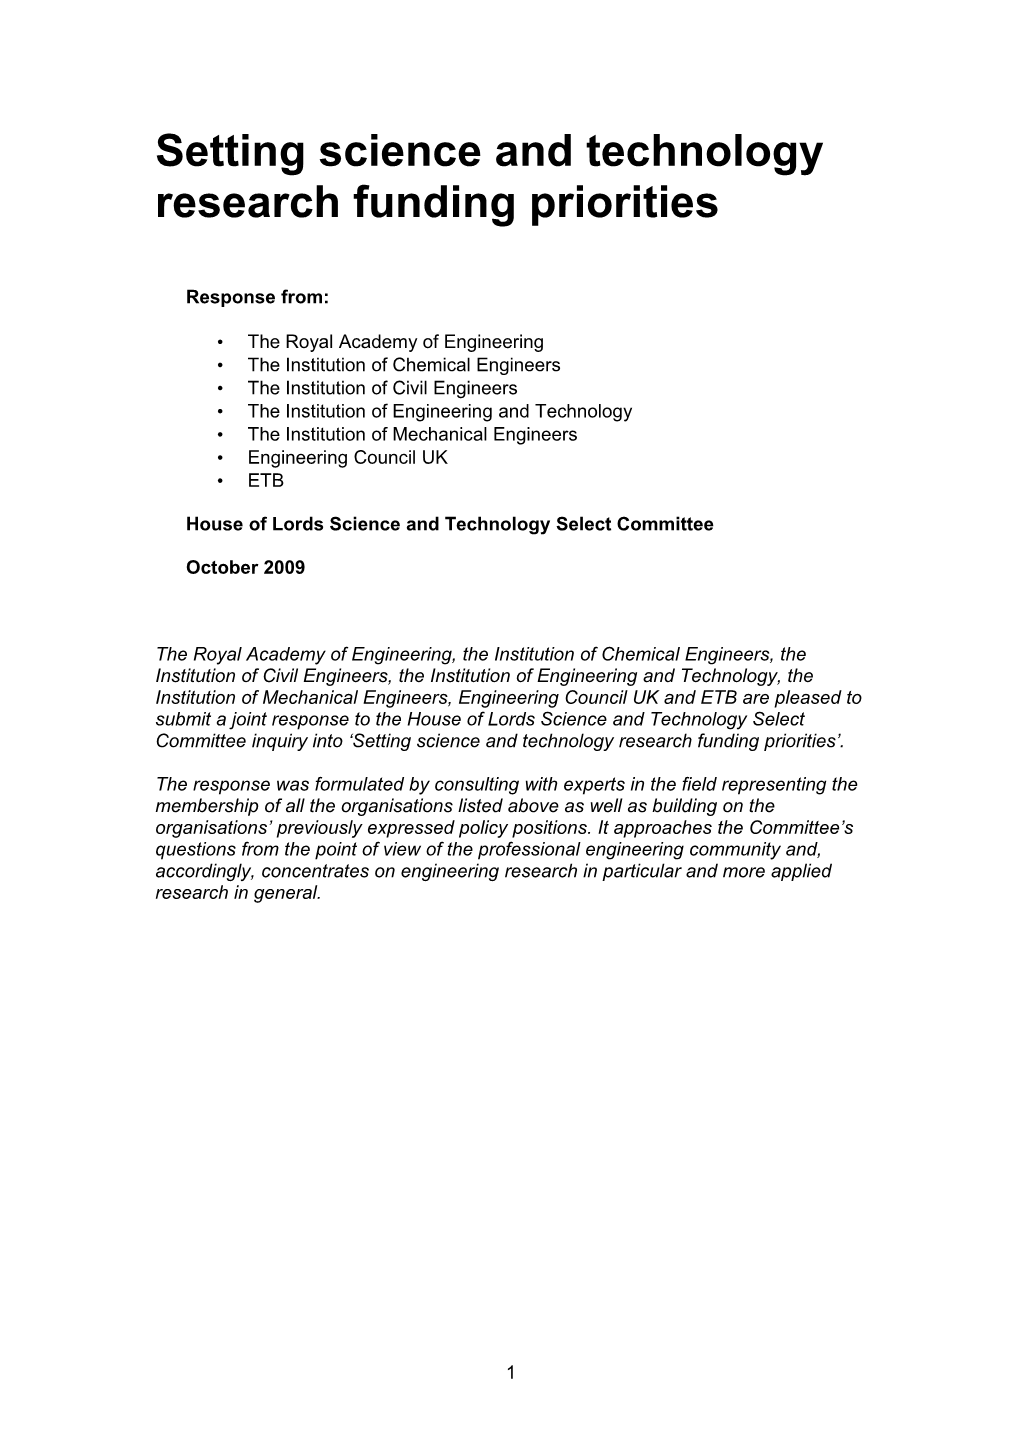 Setting Science and Technology Research Funding Priorities